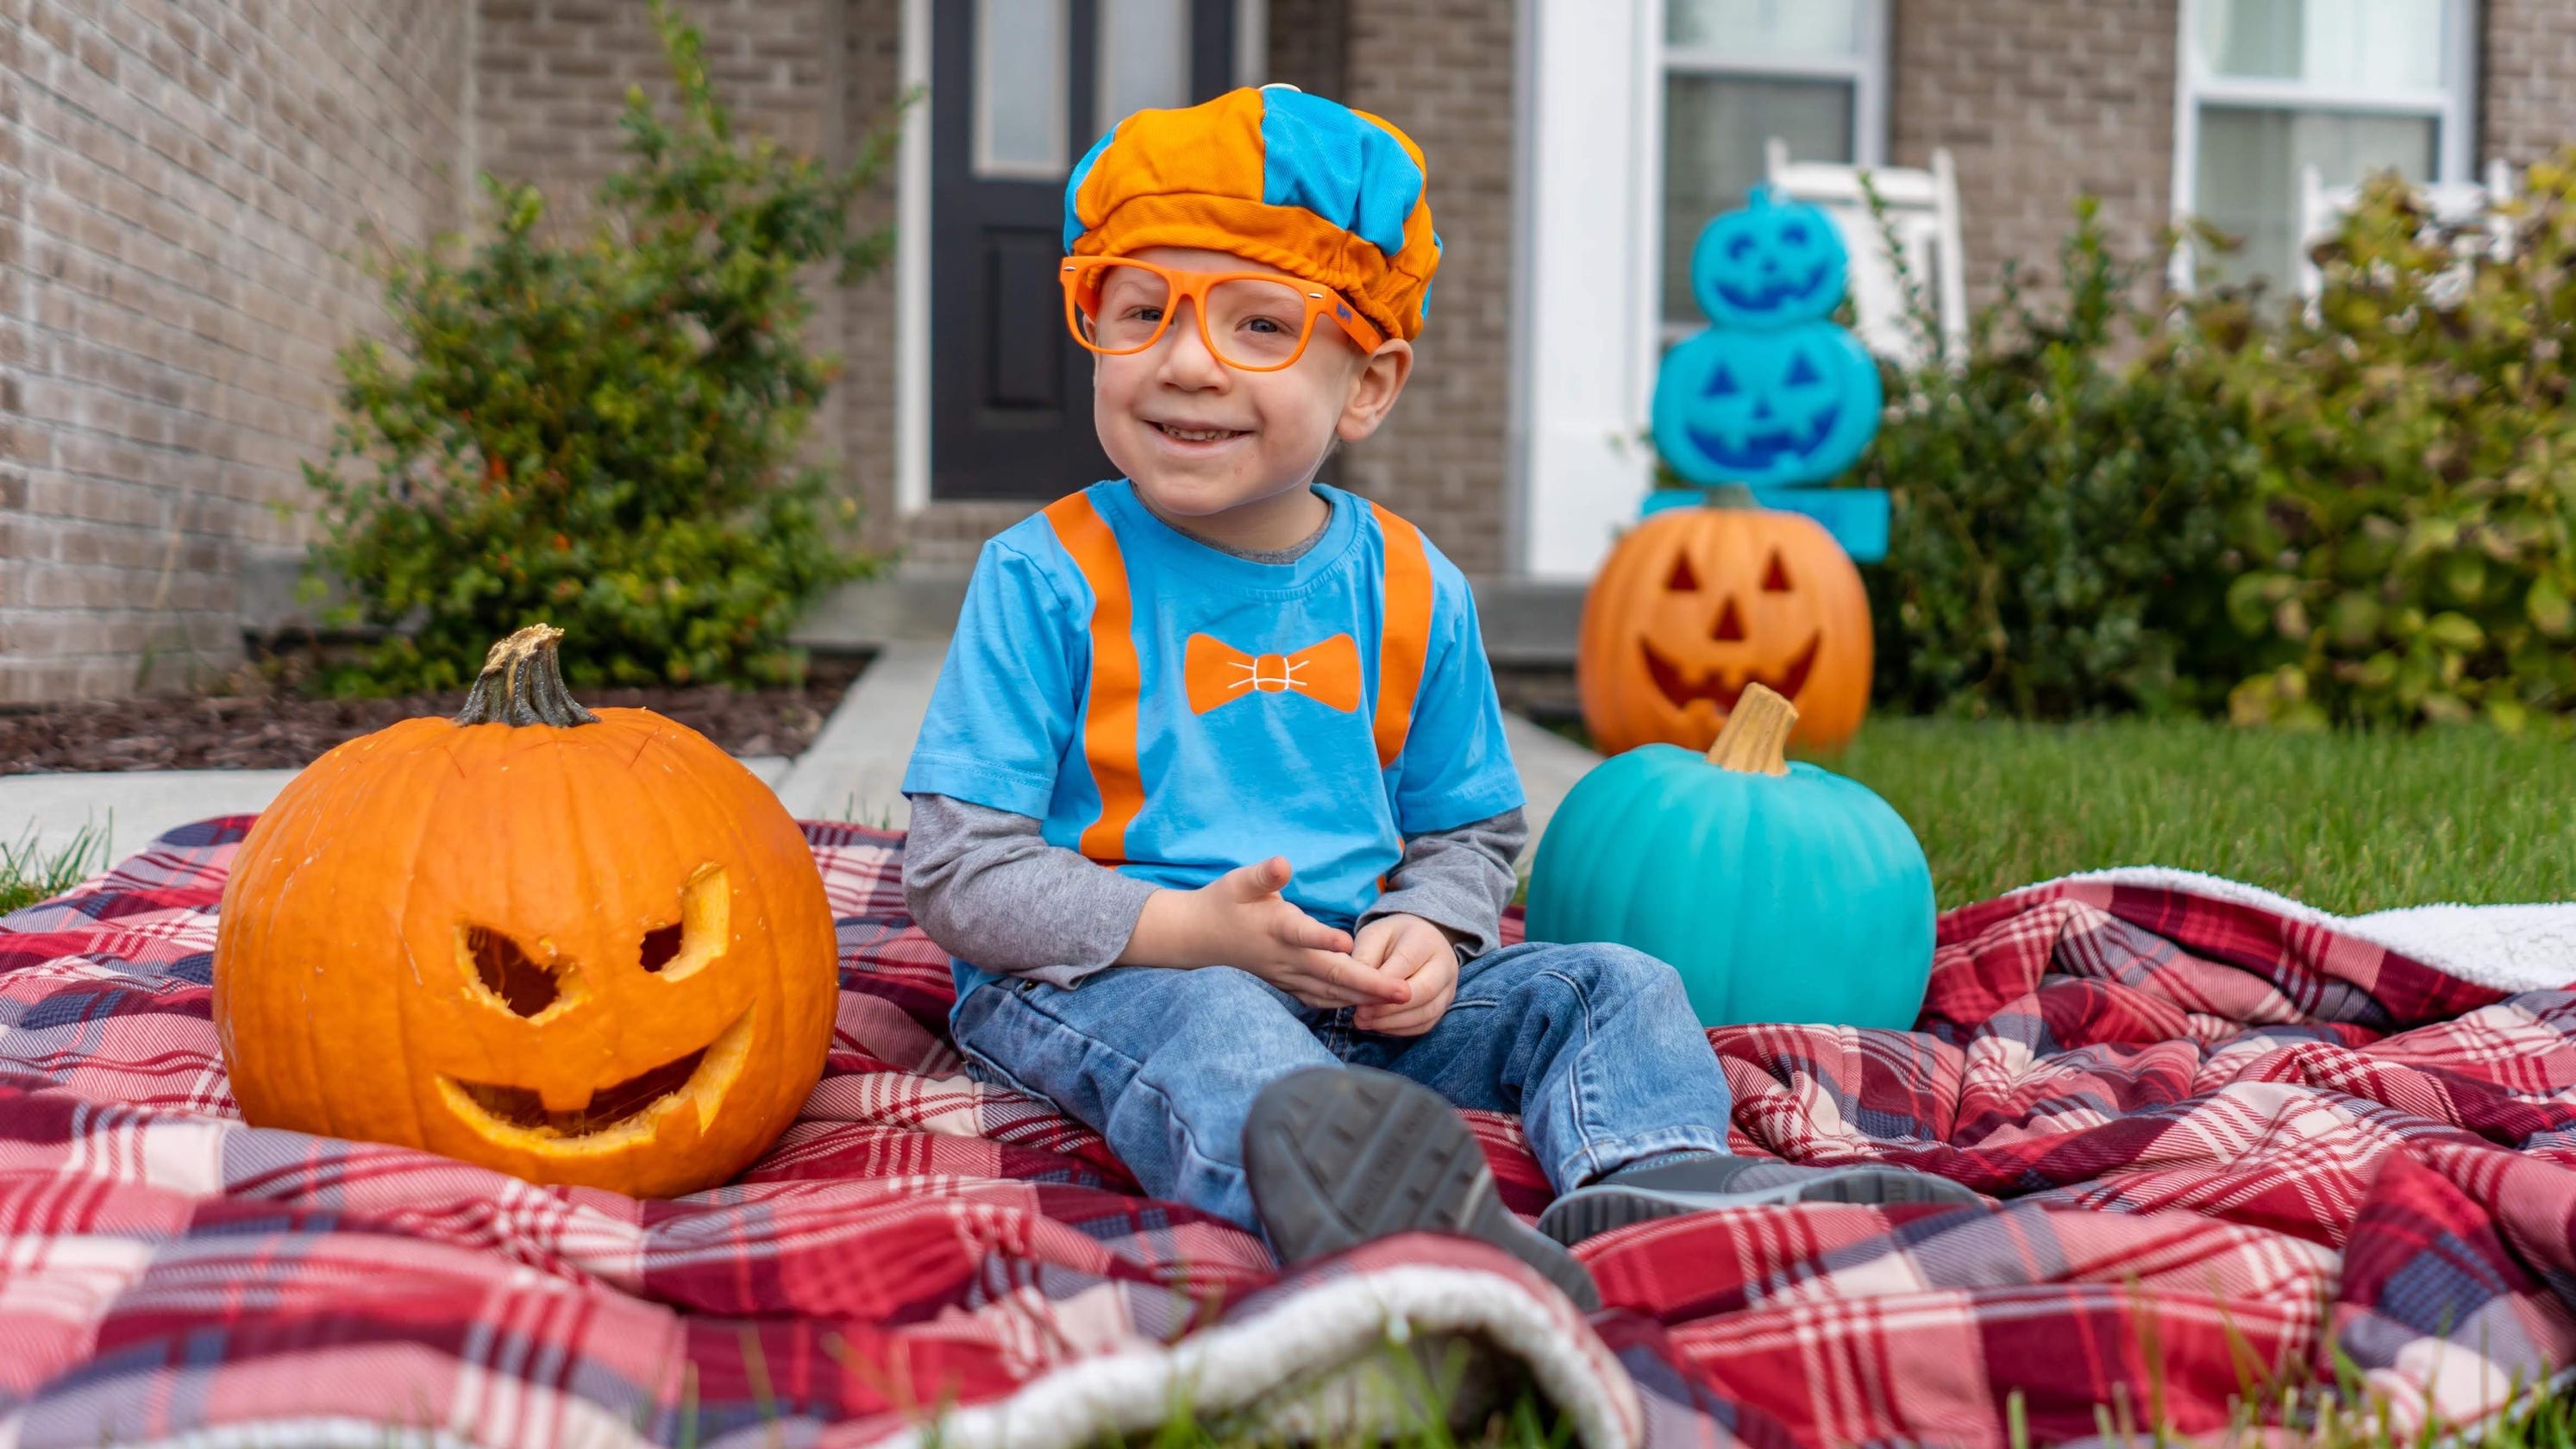 Why put out a teal pumpkin and non-food treats? Moms with kids who depend on them explain